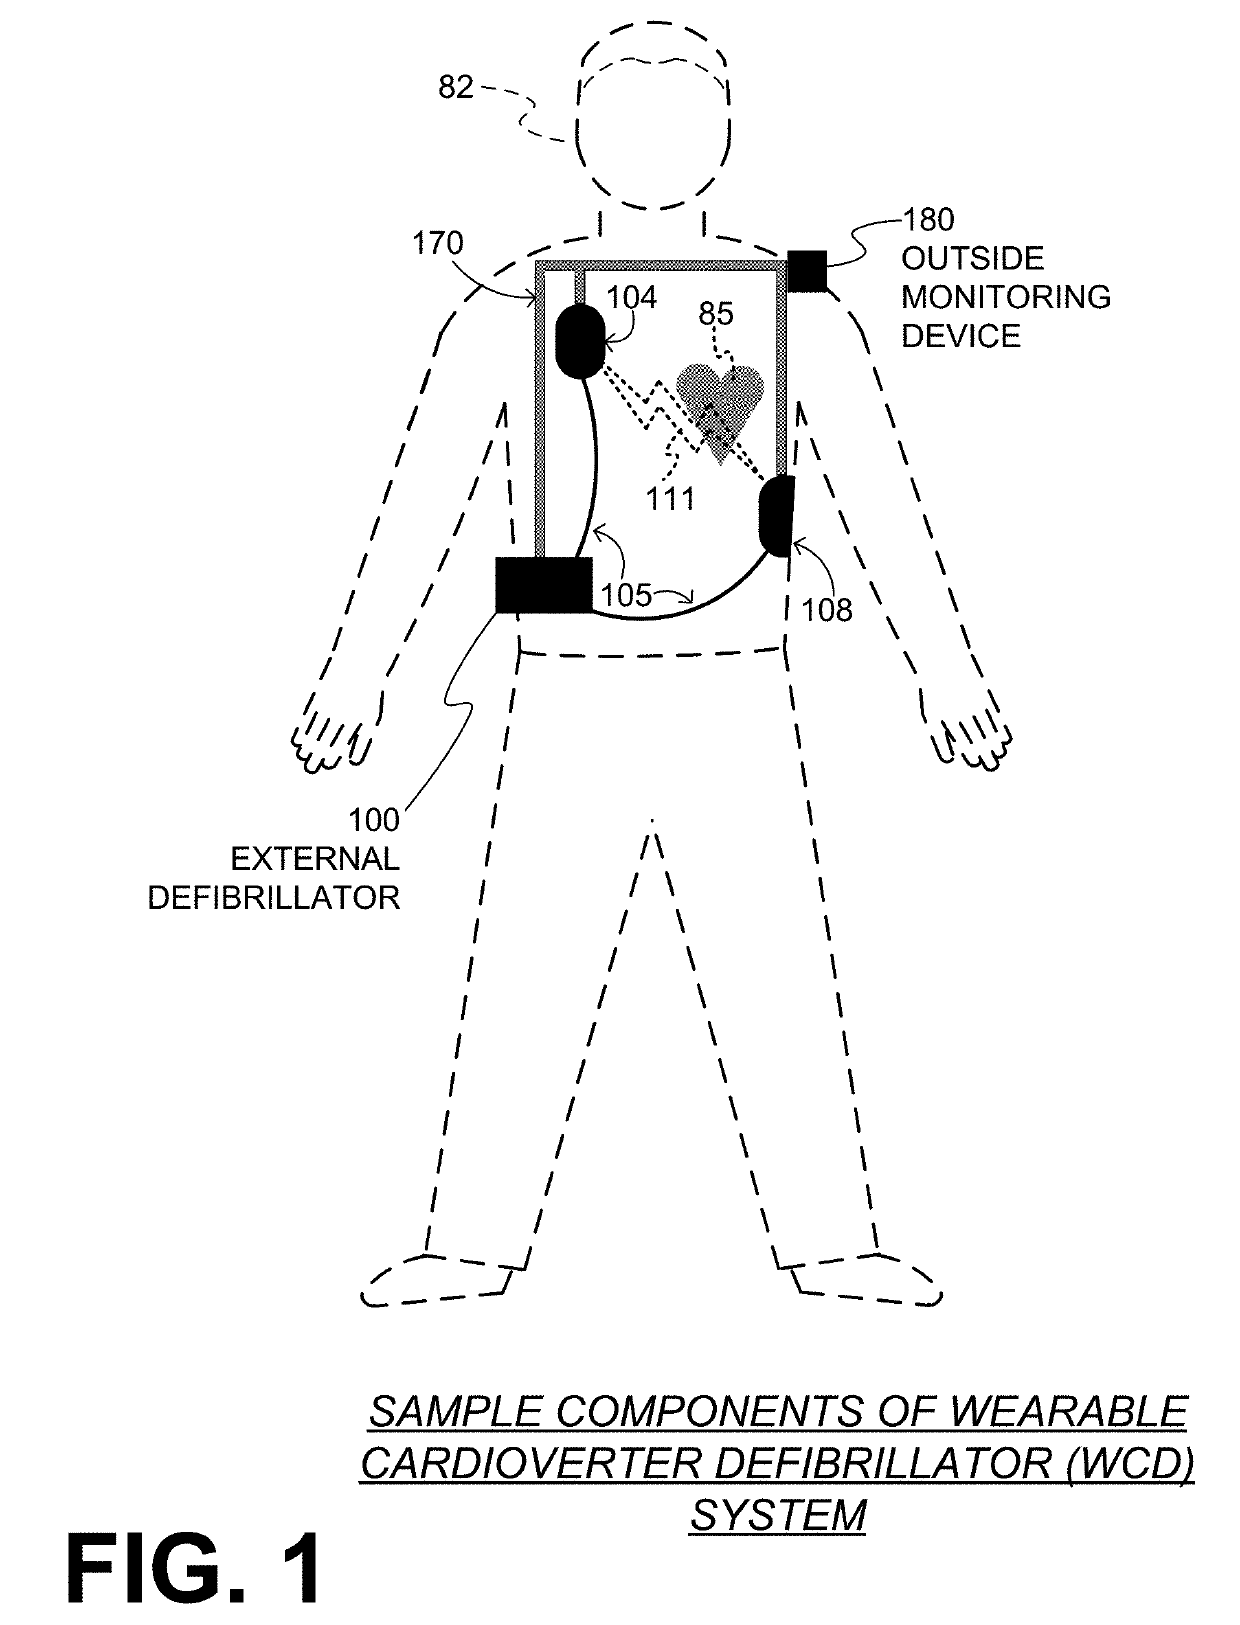 Wearable cardioverter defibrillator (WCD) system detecting ventricular tachycardia and/or ventricular fibrillation using variable heart rate decision threshold